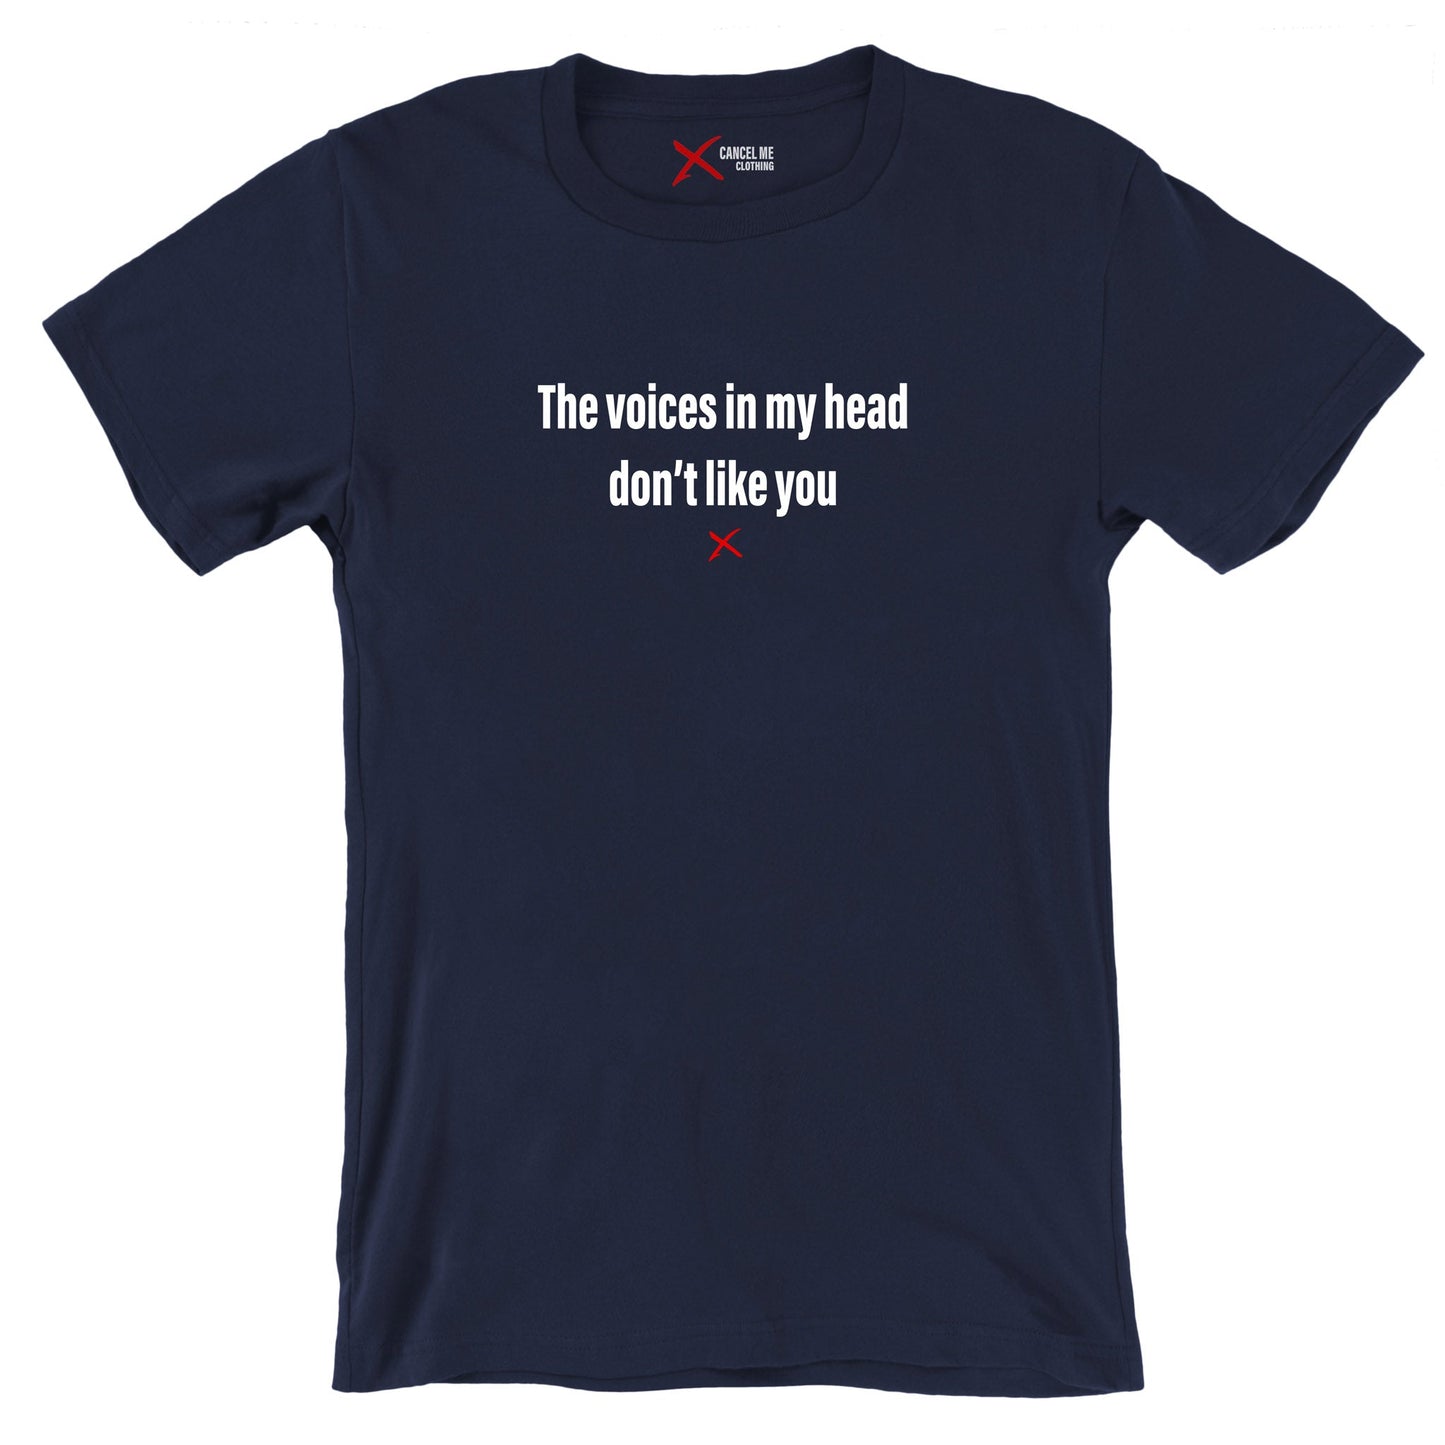 The voices in my head don't like you - Shirt